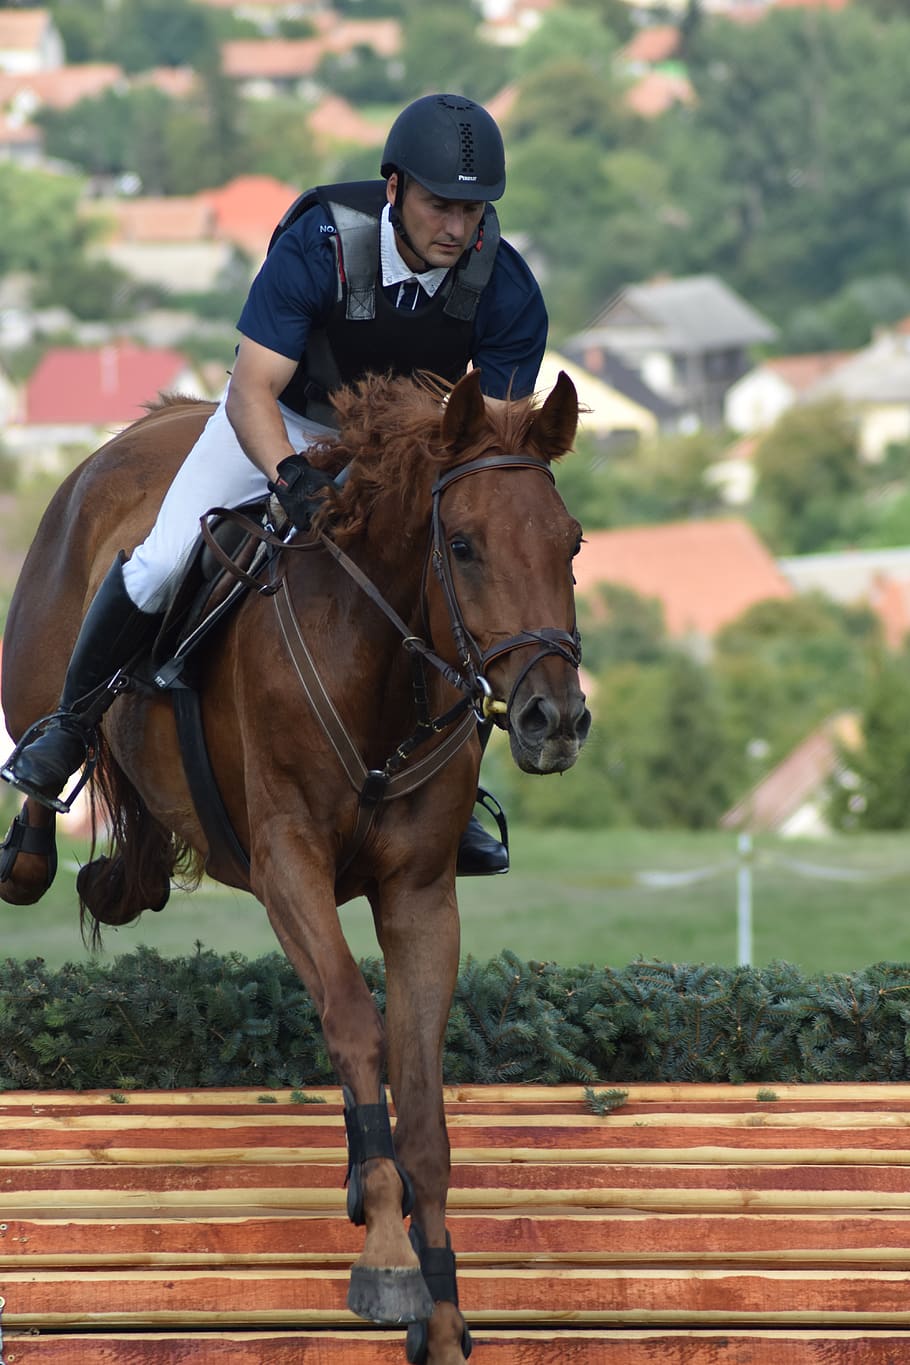 rider, show jumping, competition, ride, barrier, animal, horses, dressage, horse, horseback riding